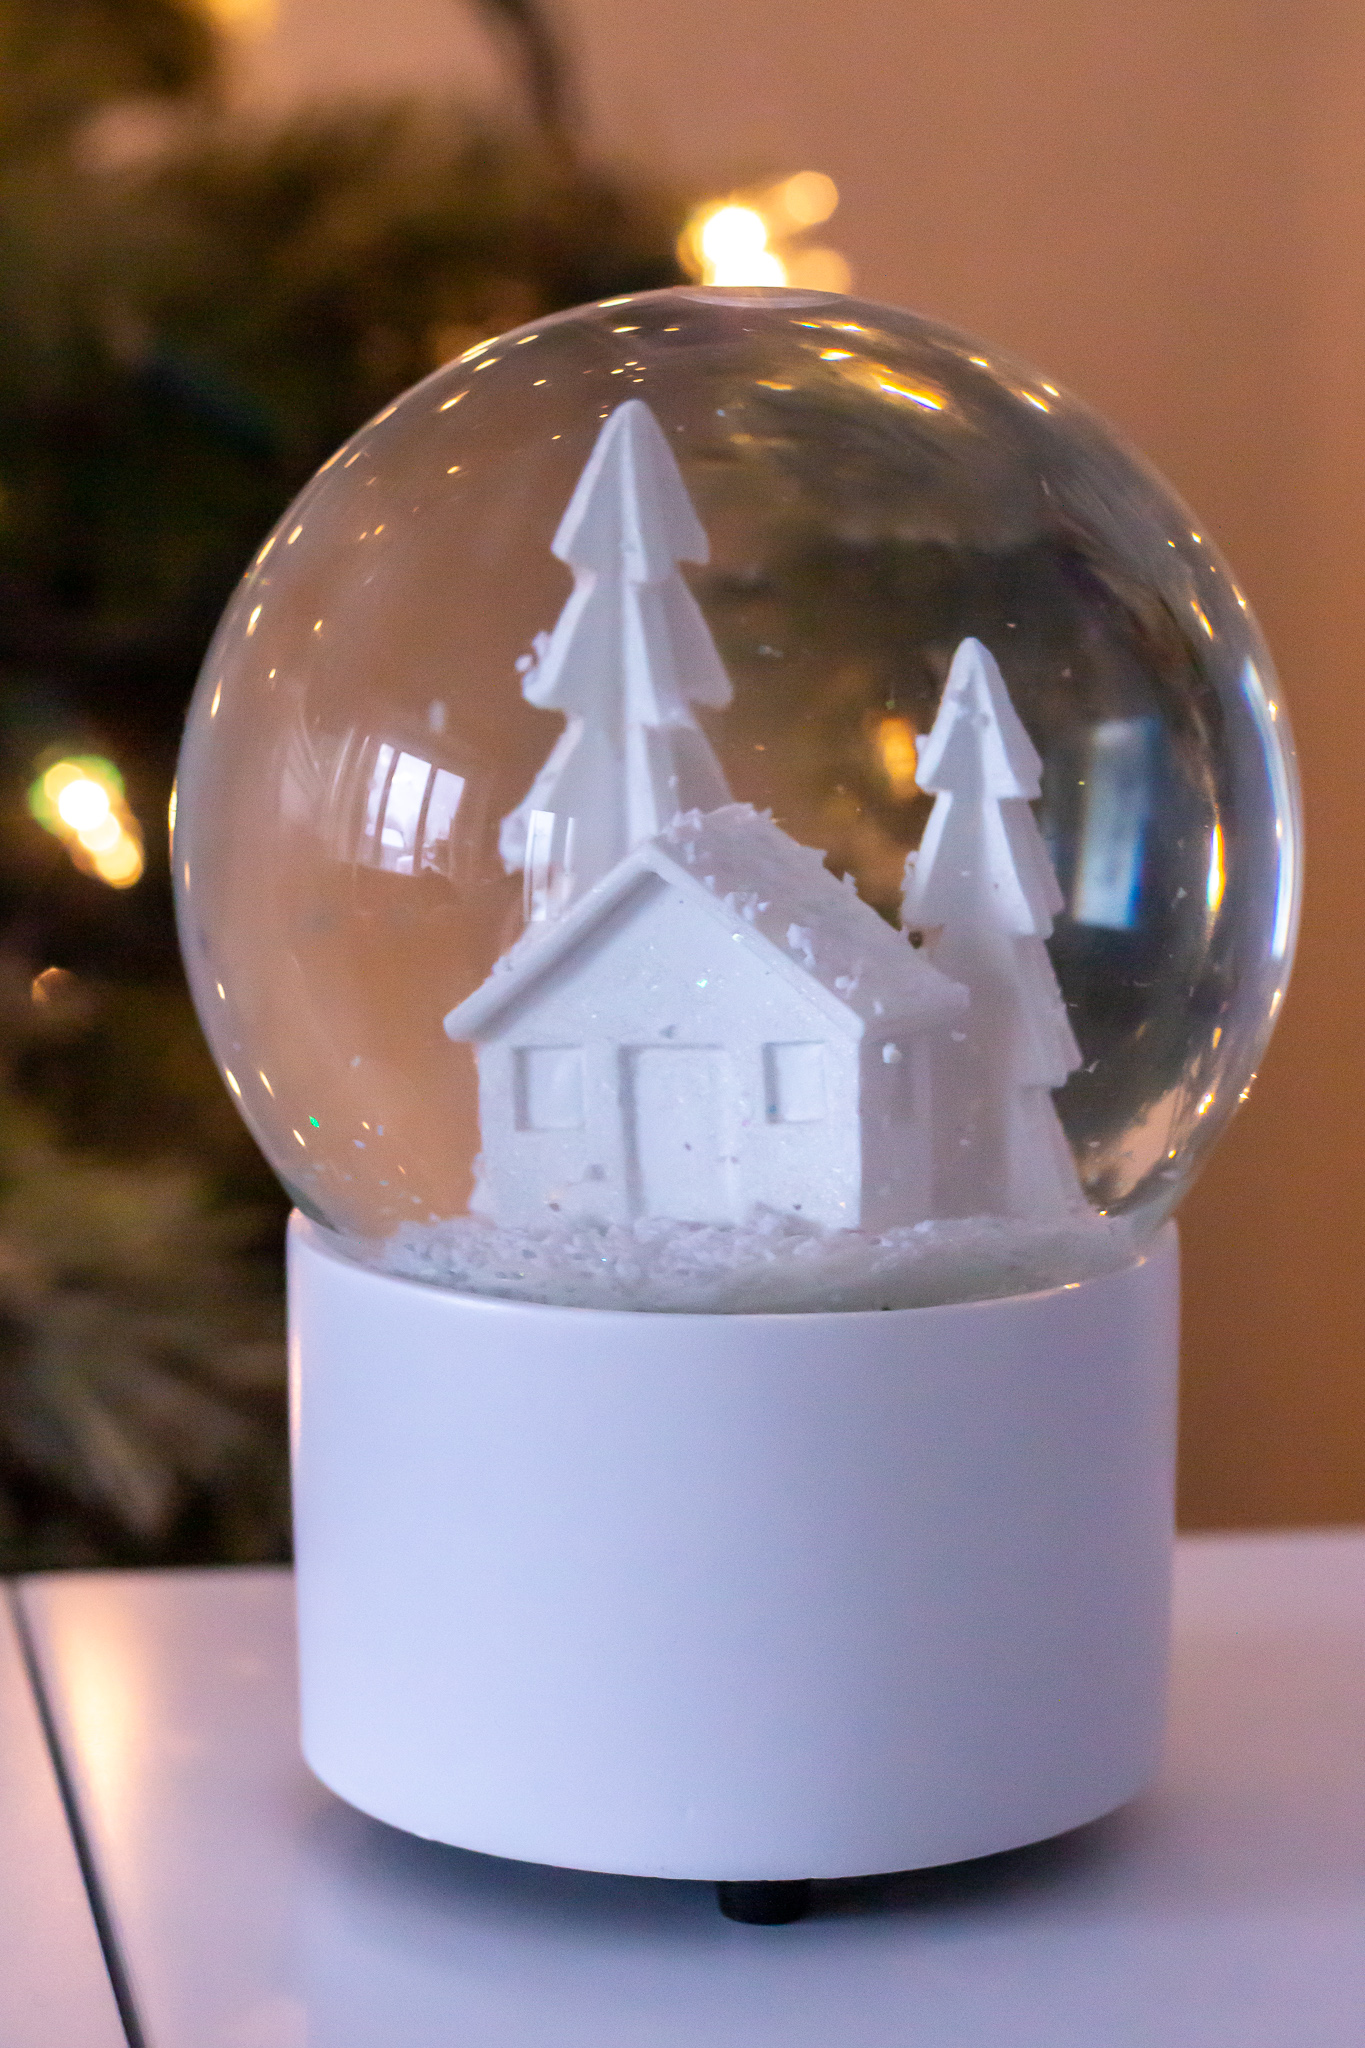 Saving Our Snow Globe: Being Eco-Friendly at Christmas